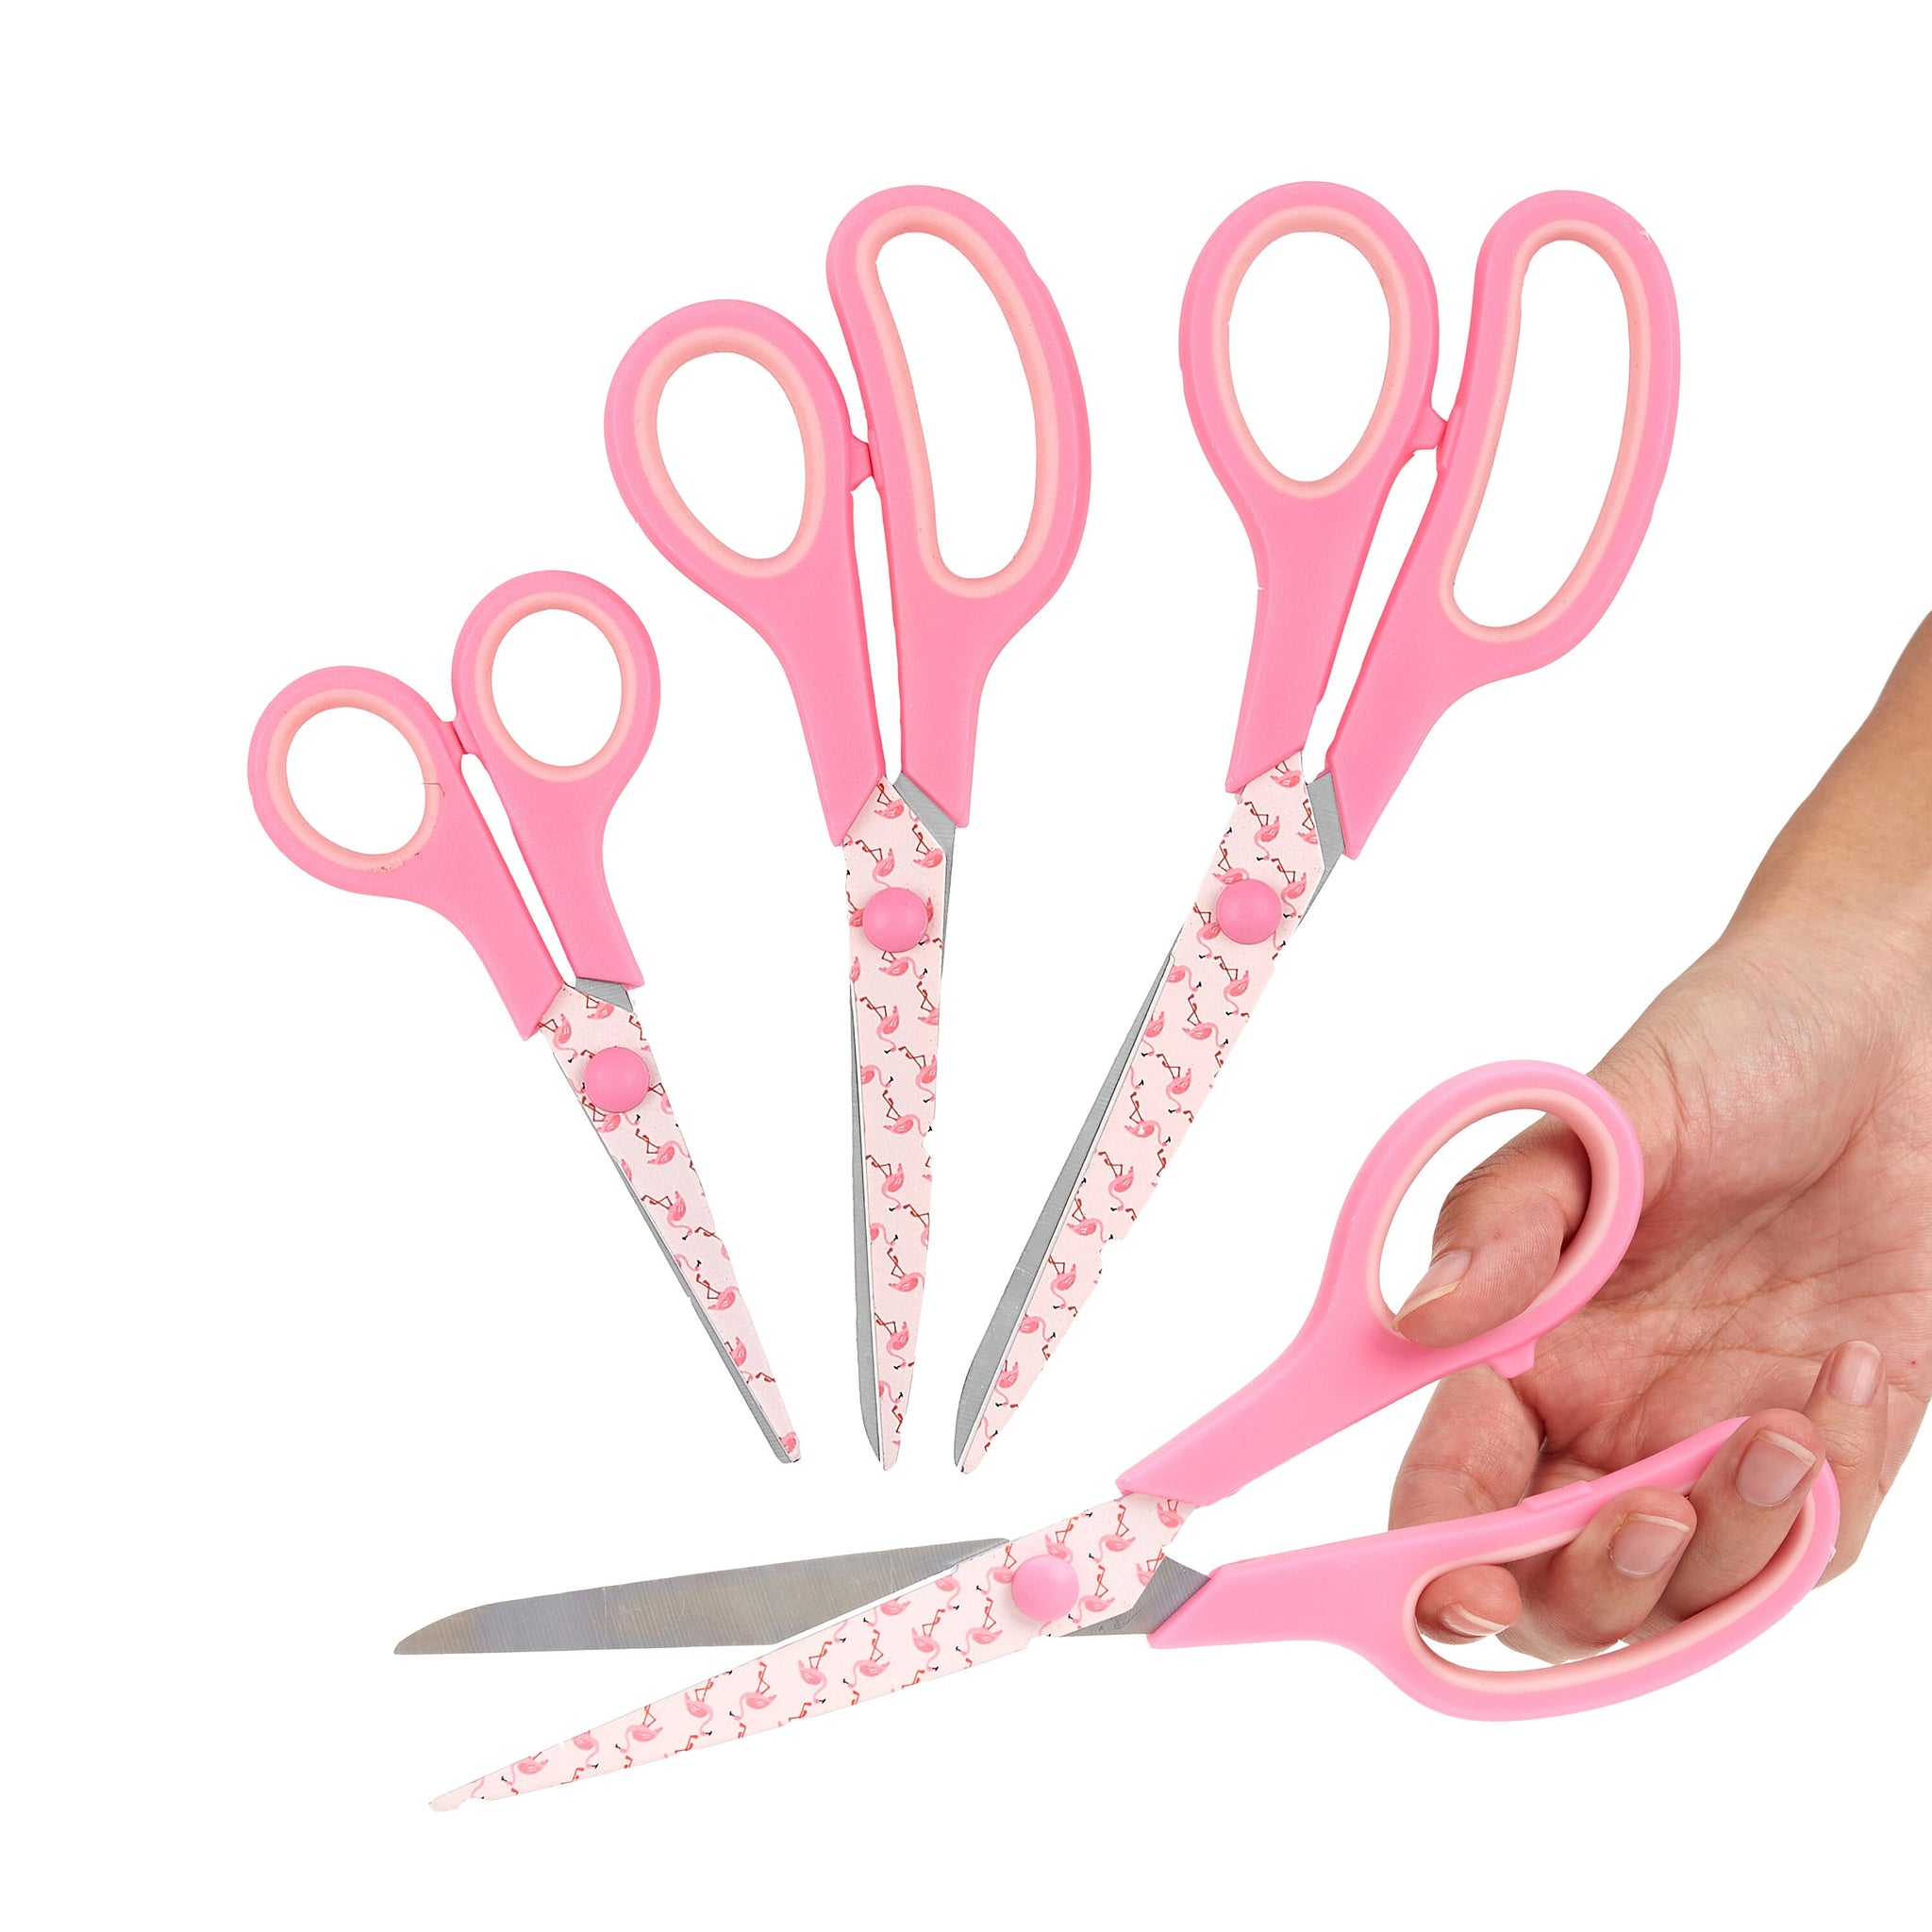 7.5 Stainless Steel Good Quality Scissors For Crafts Sewing School Sharp  Blade